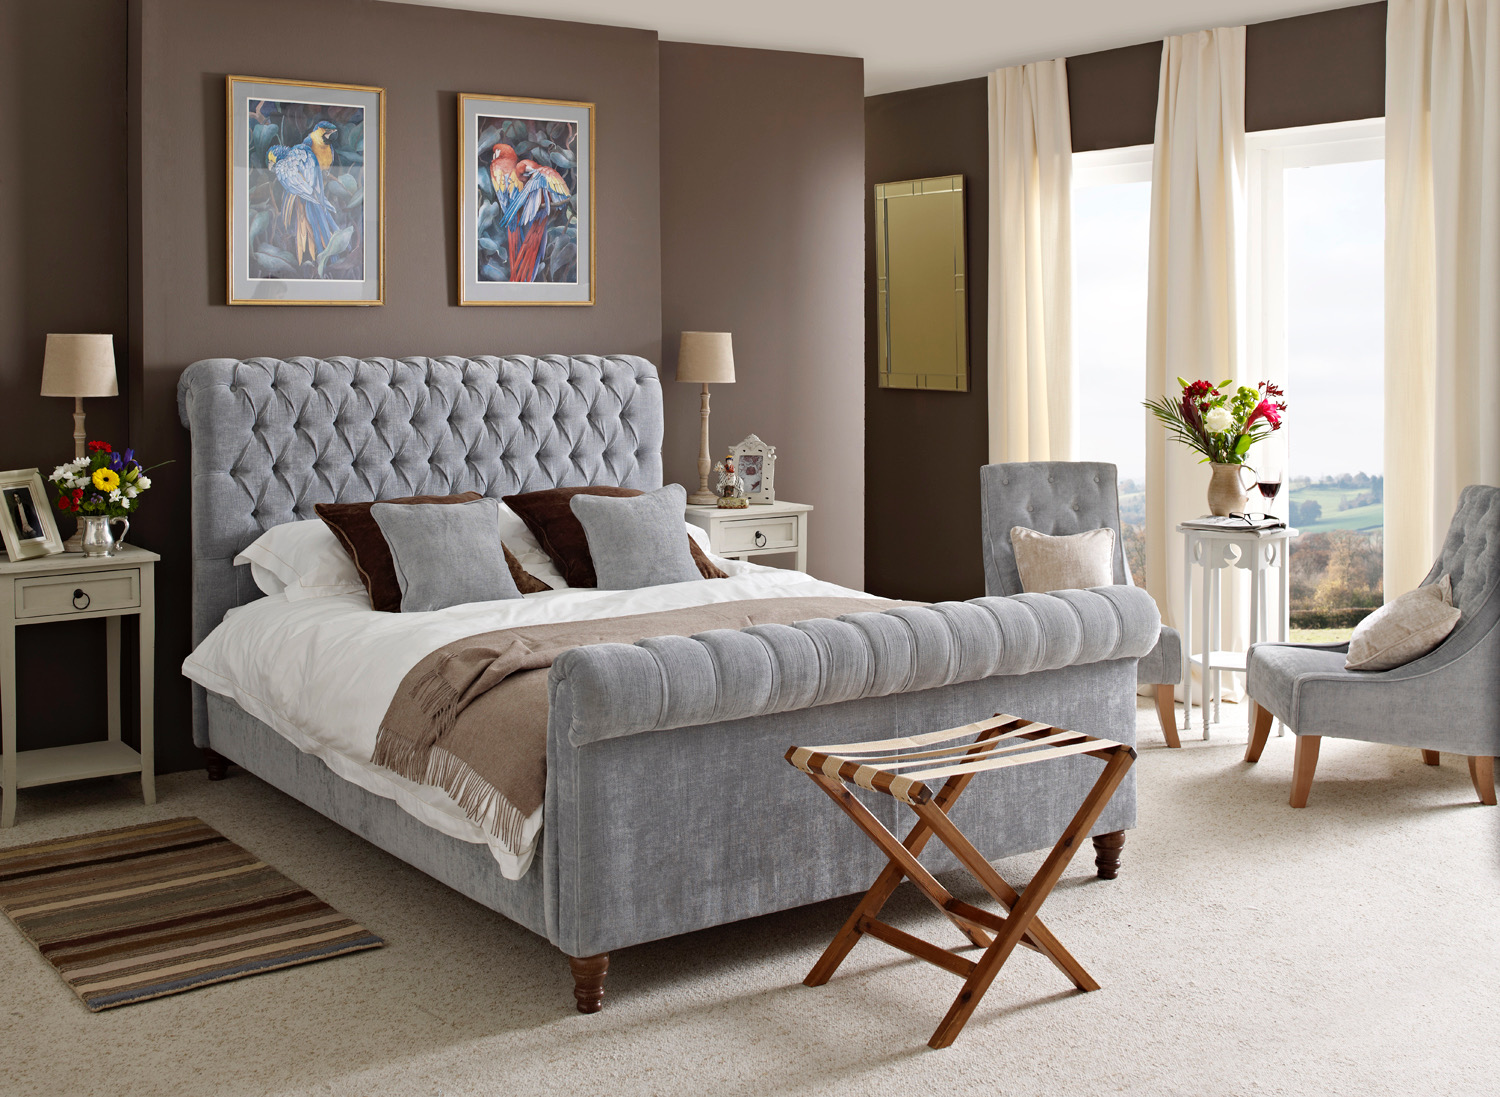 Small Bedroom With A King Size Bed, King Size Bed Frame With Headboard And Footboard Dimensions